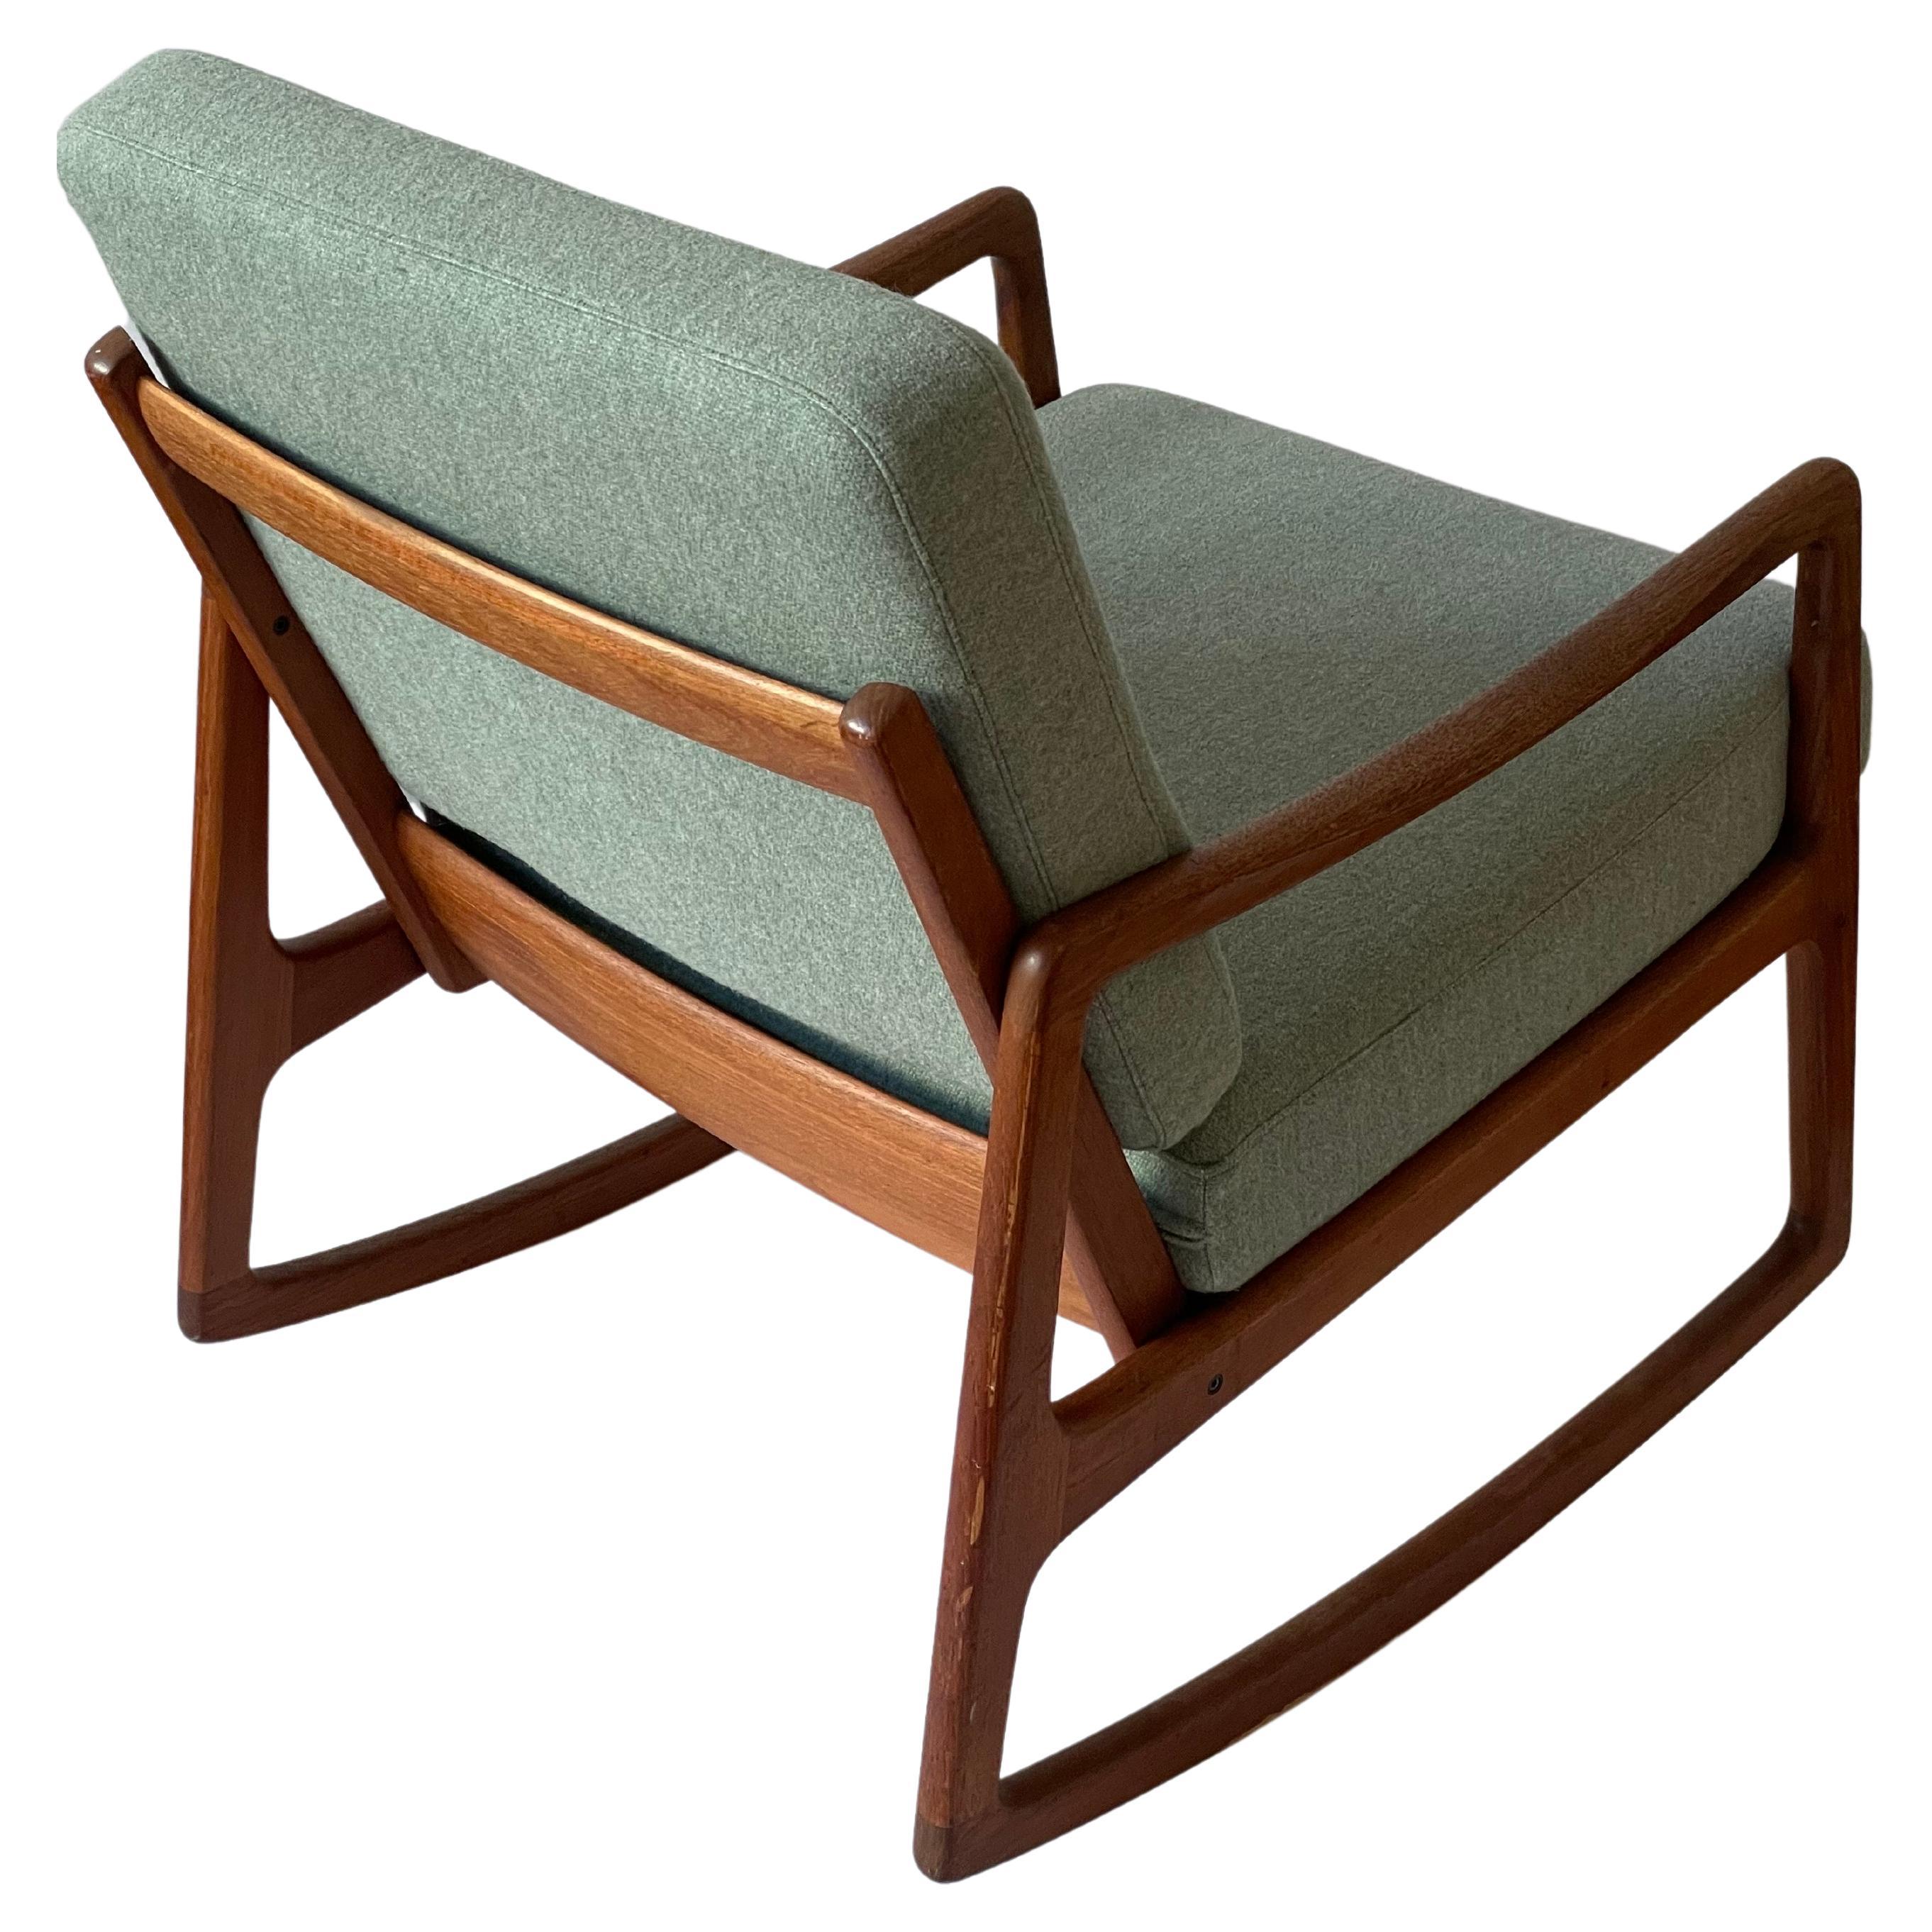 Danish Teak Rocking Chair by Ole Wanscher 1950s with New Upholstery